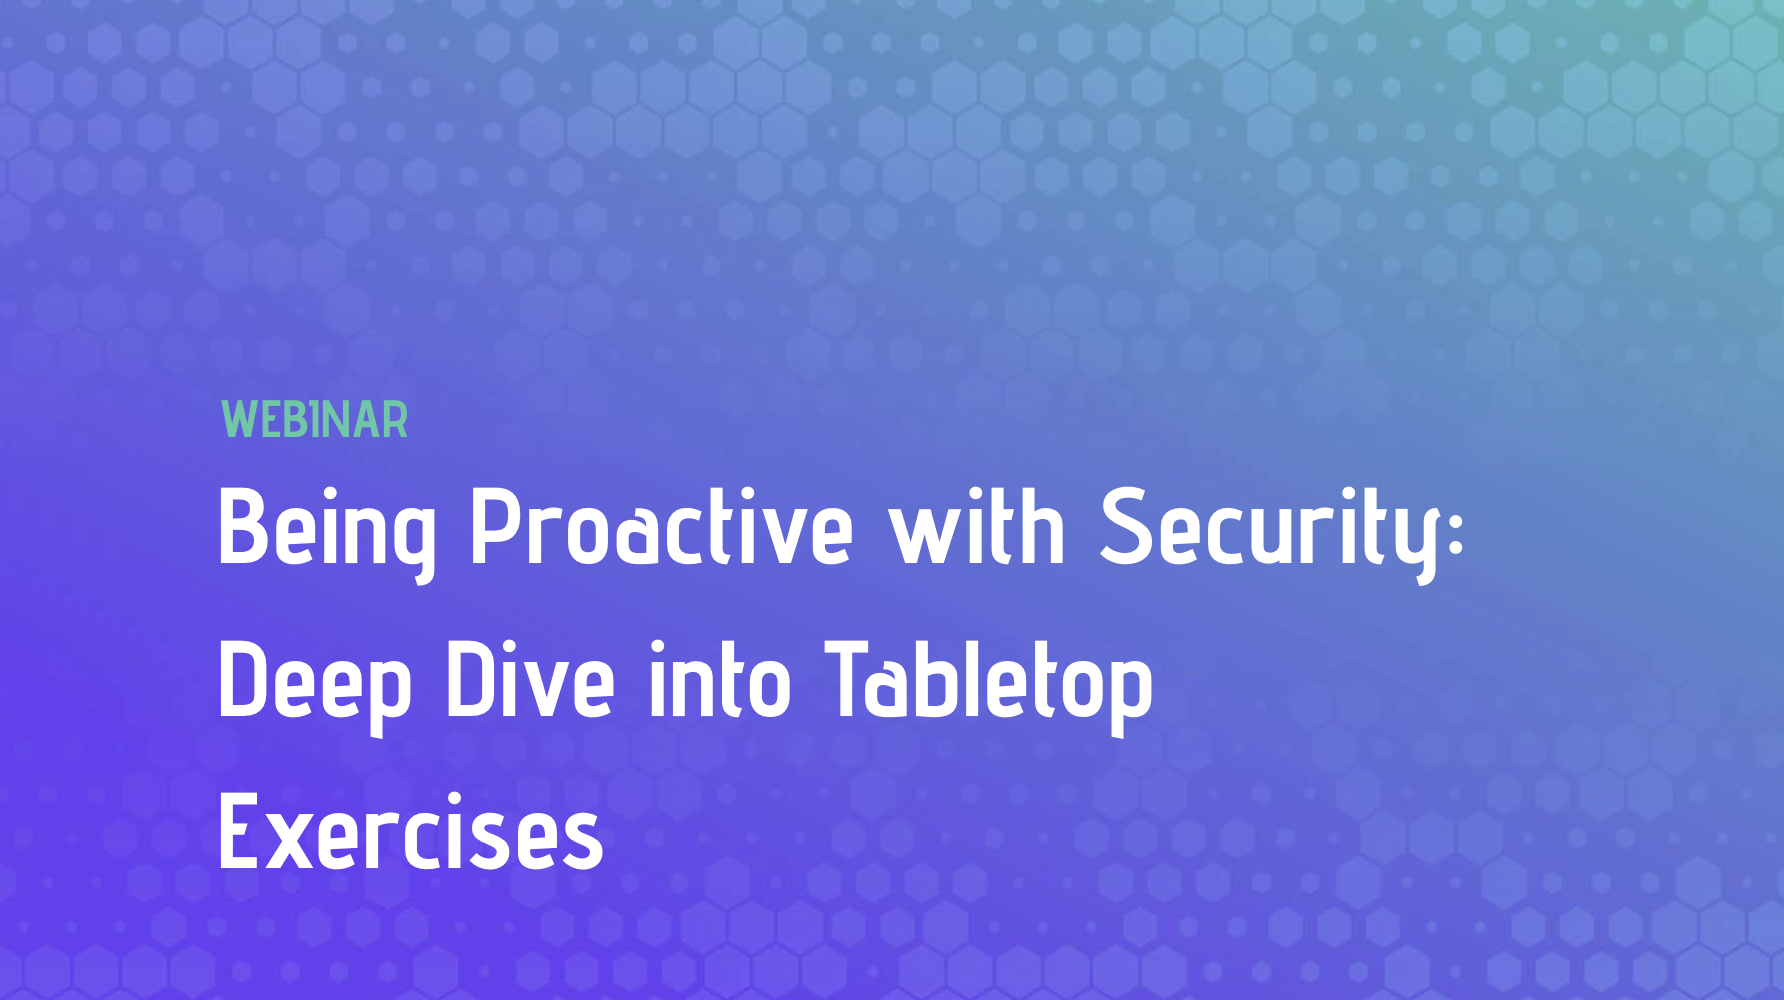 Being Proactive with Security: Deep Dive into Tabletop Exercises